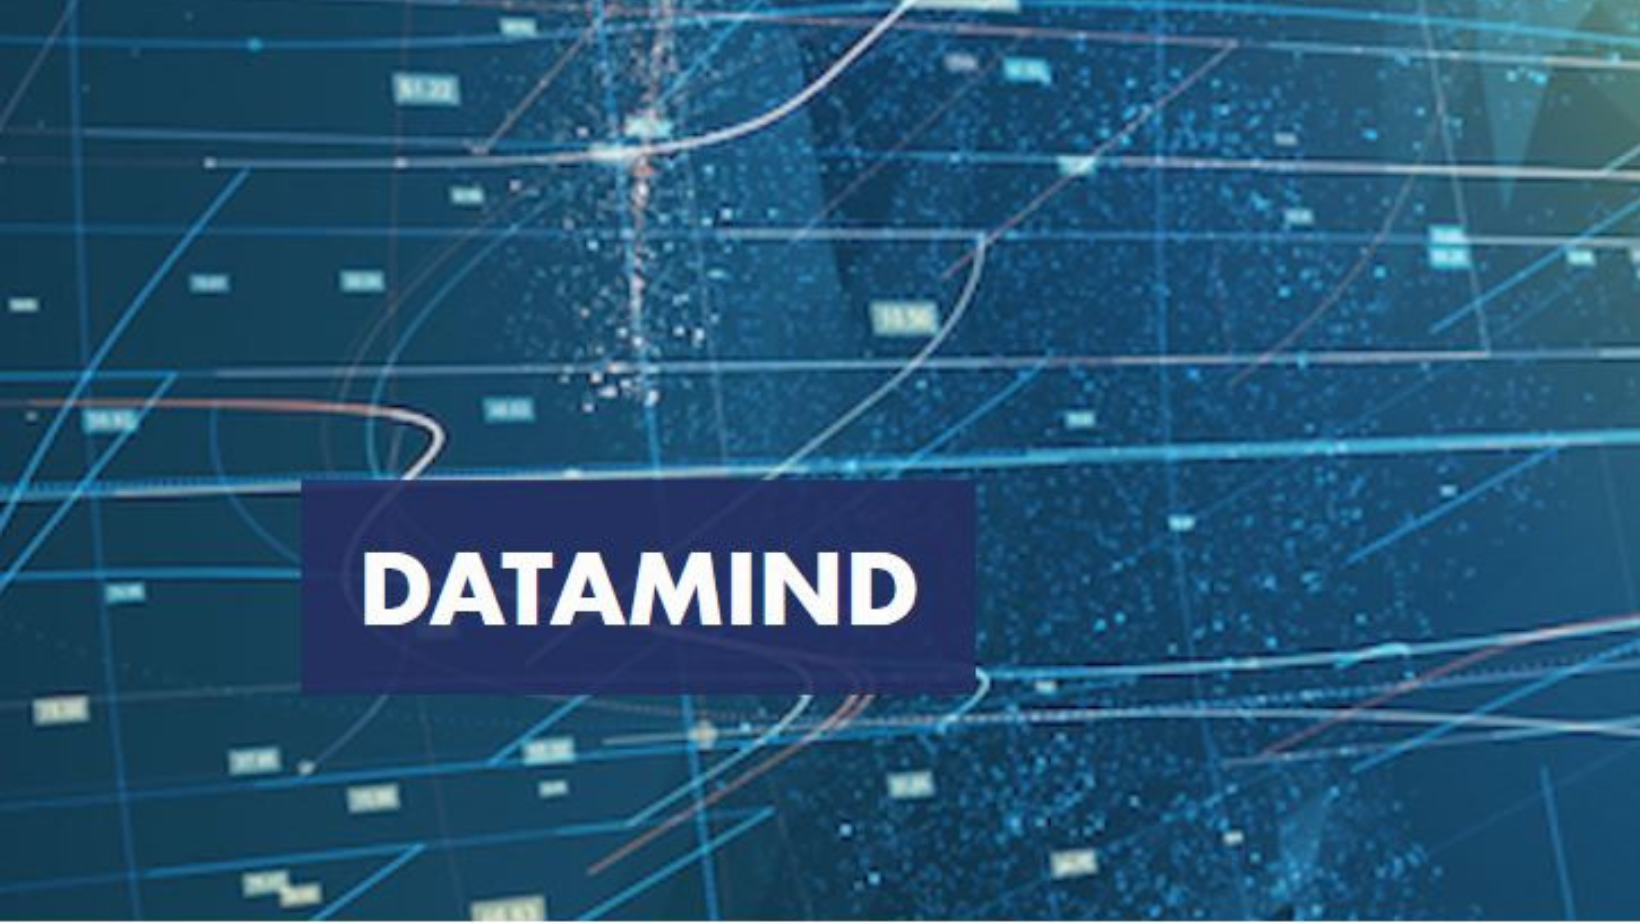 DATAMIND/PHASE (Health dAta SciencE)- A Mental Health Research Data Hub